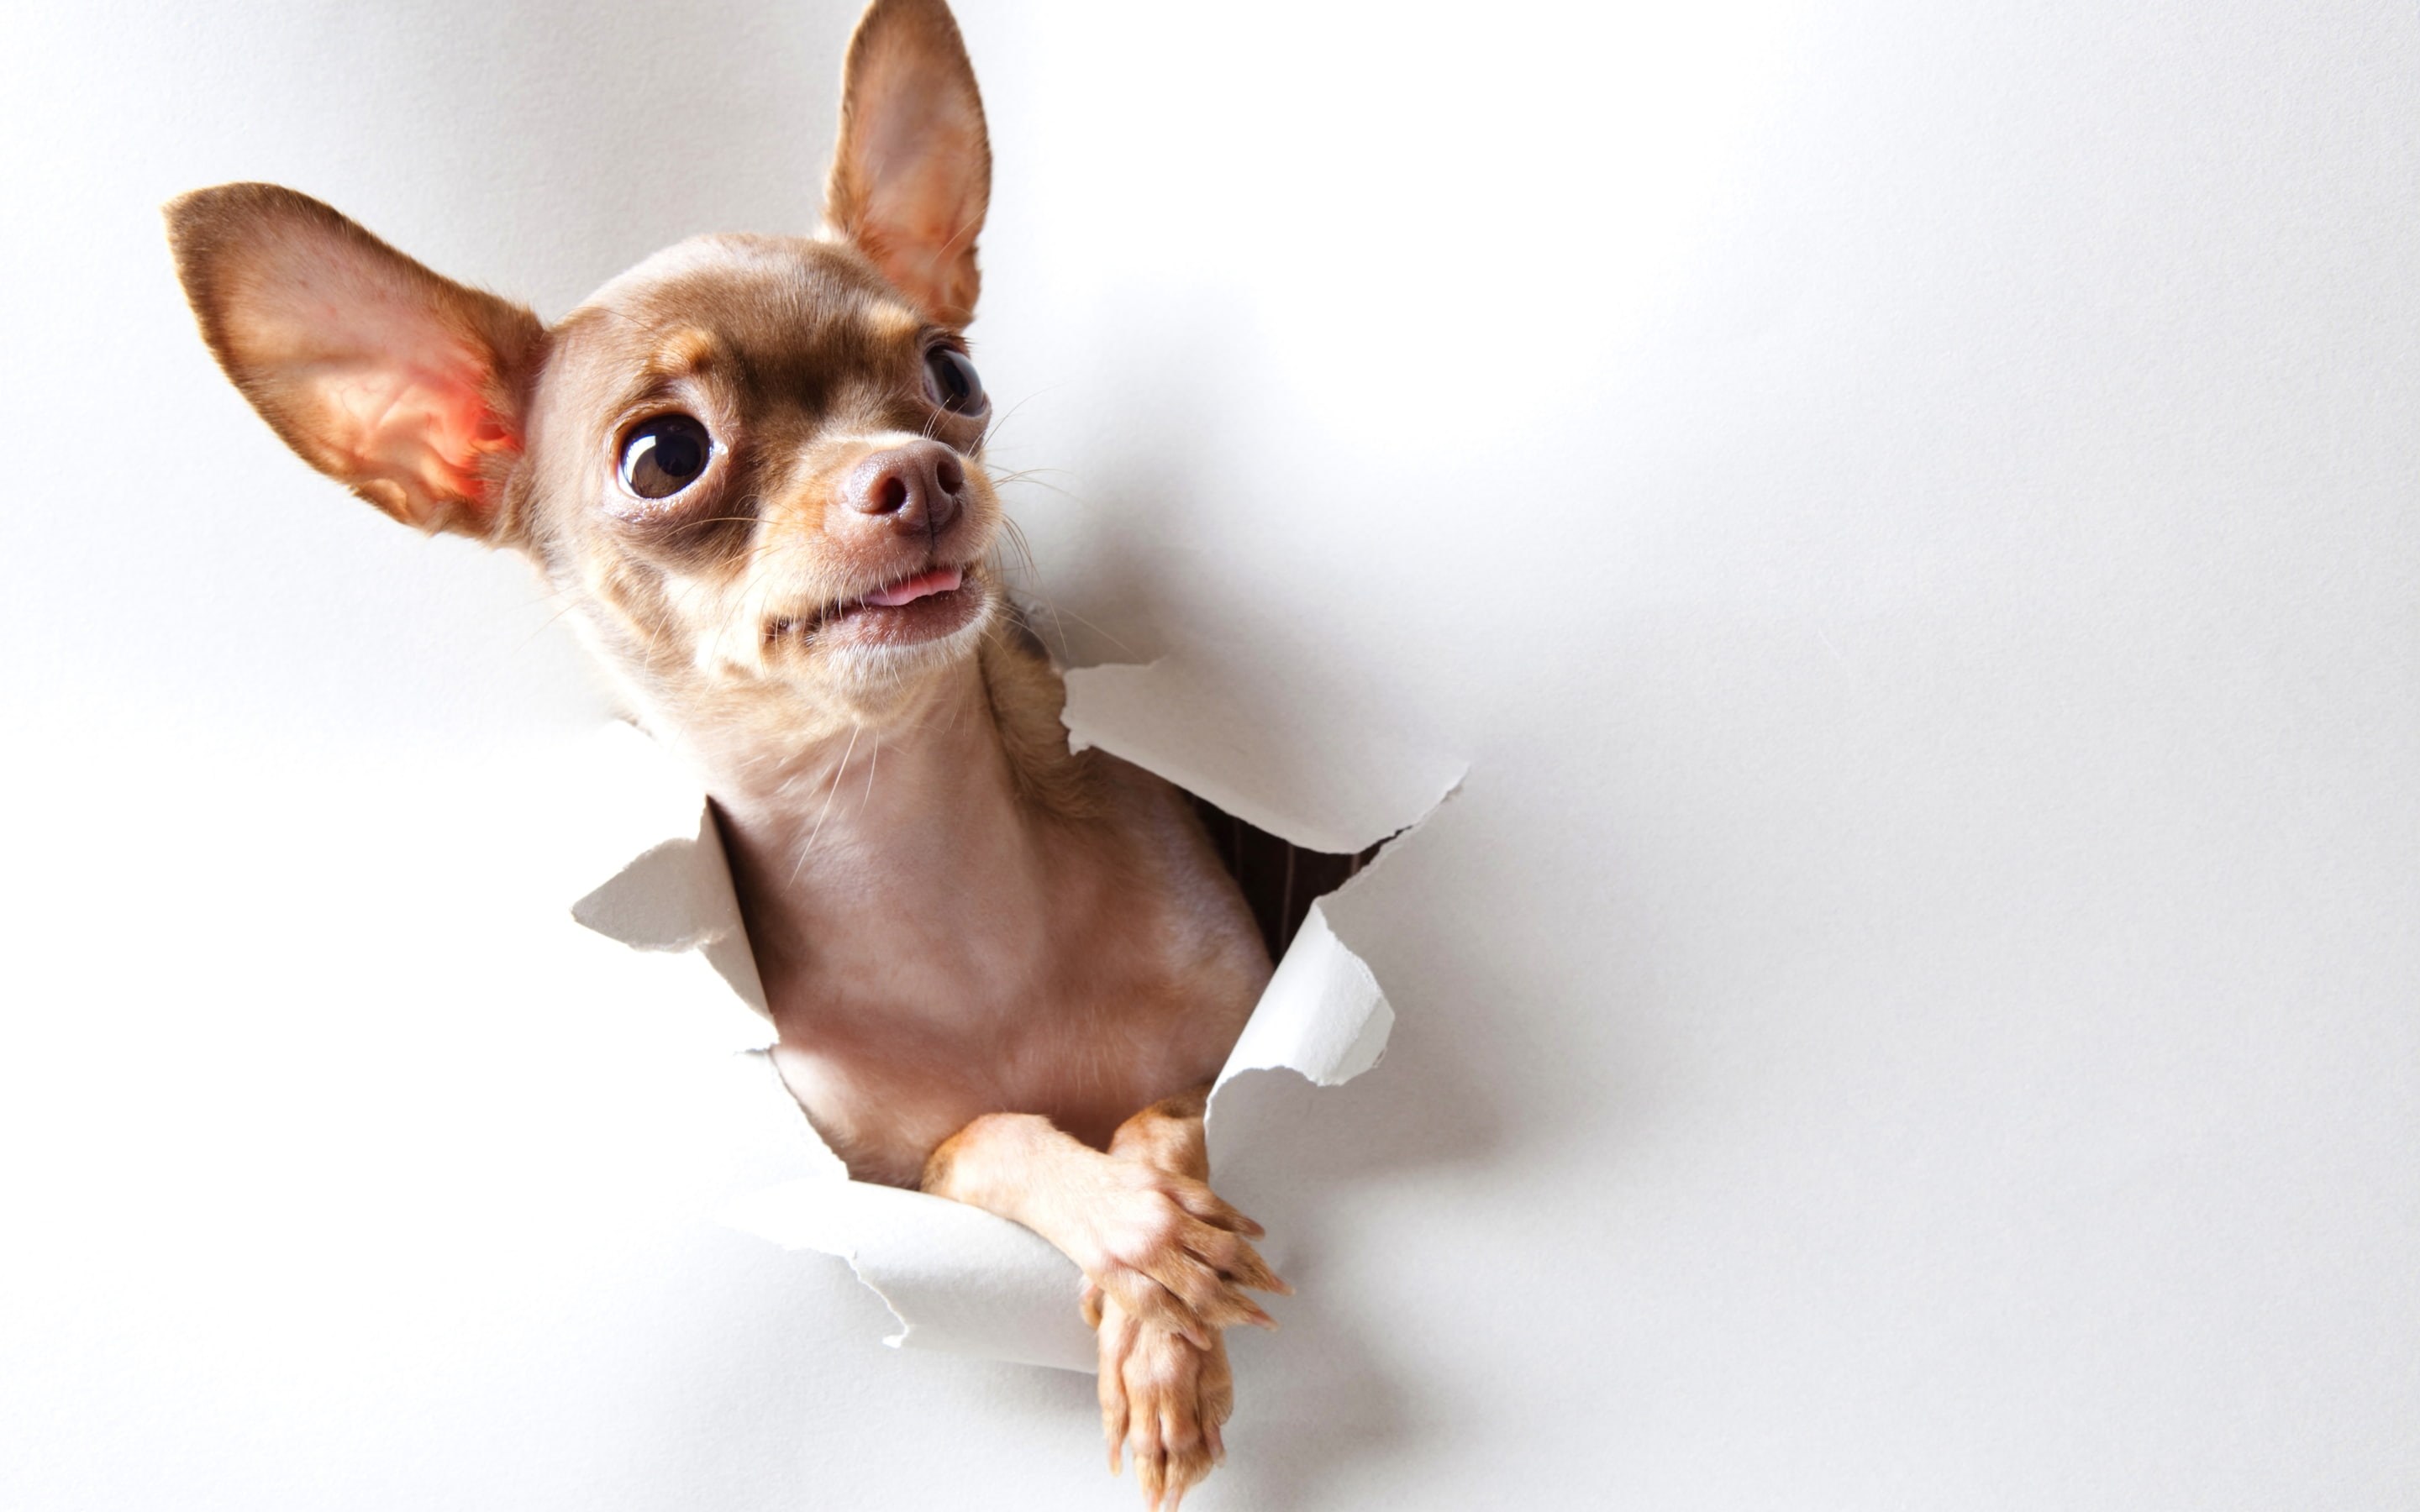 Curious Chihuahua, puppy, background, funny